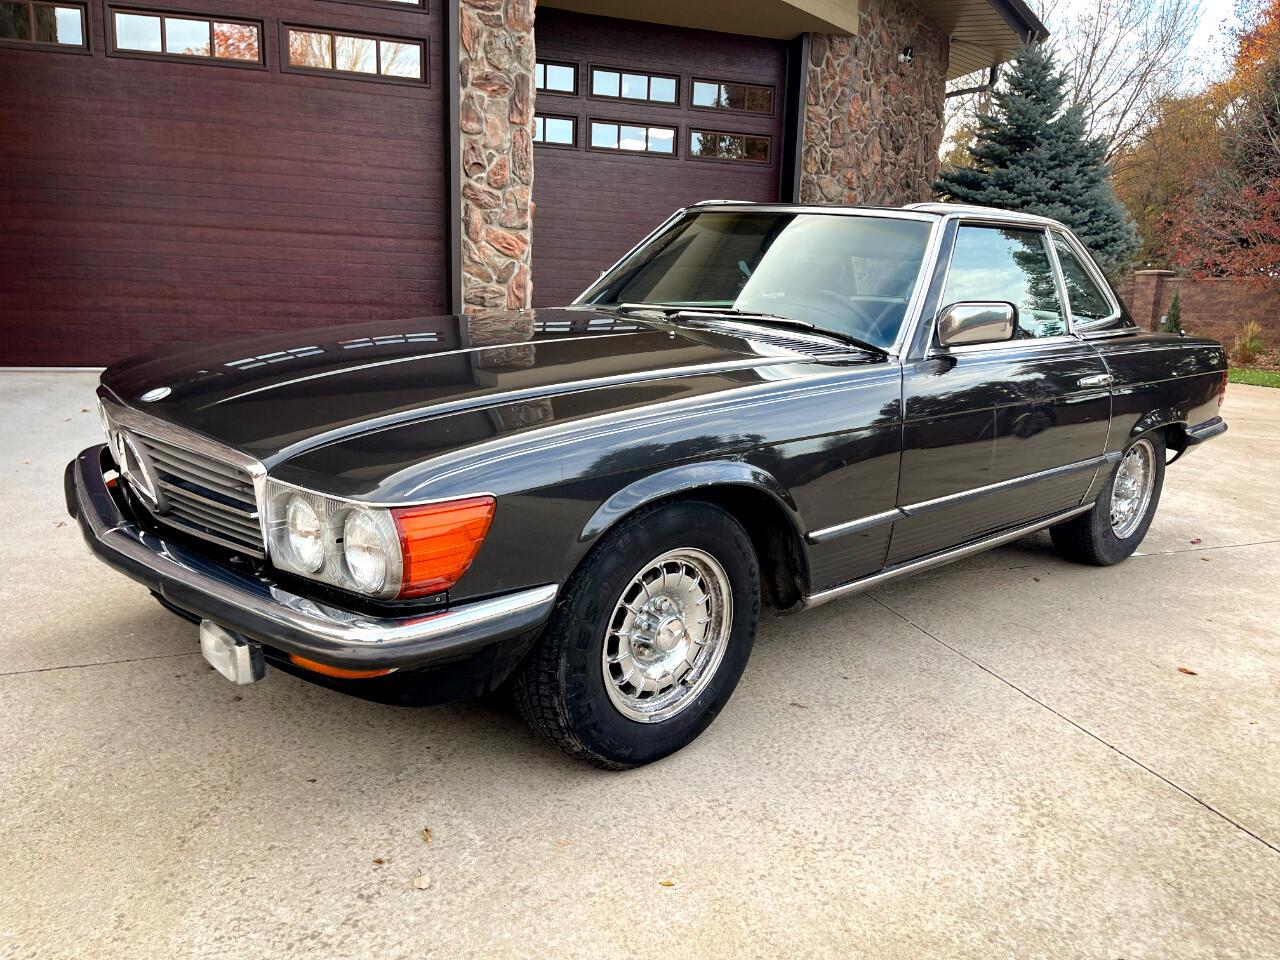 For Sale: 1985 Mercedes-Benz 500SL in Greeley, Colorado for sale in Greeley, CO